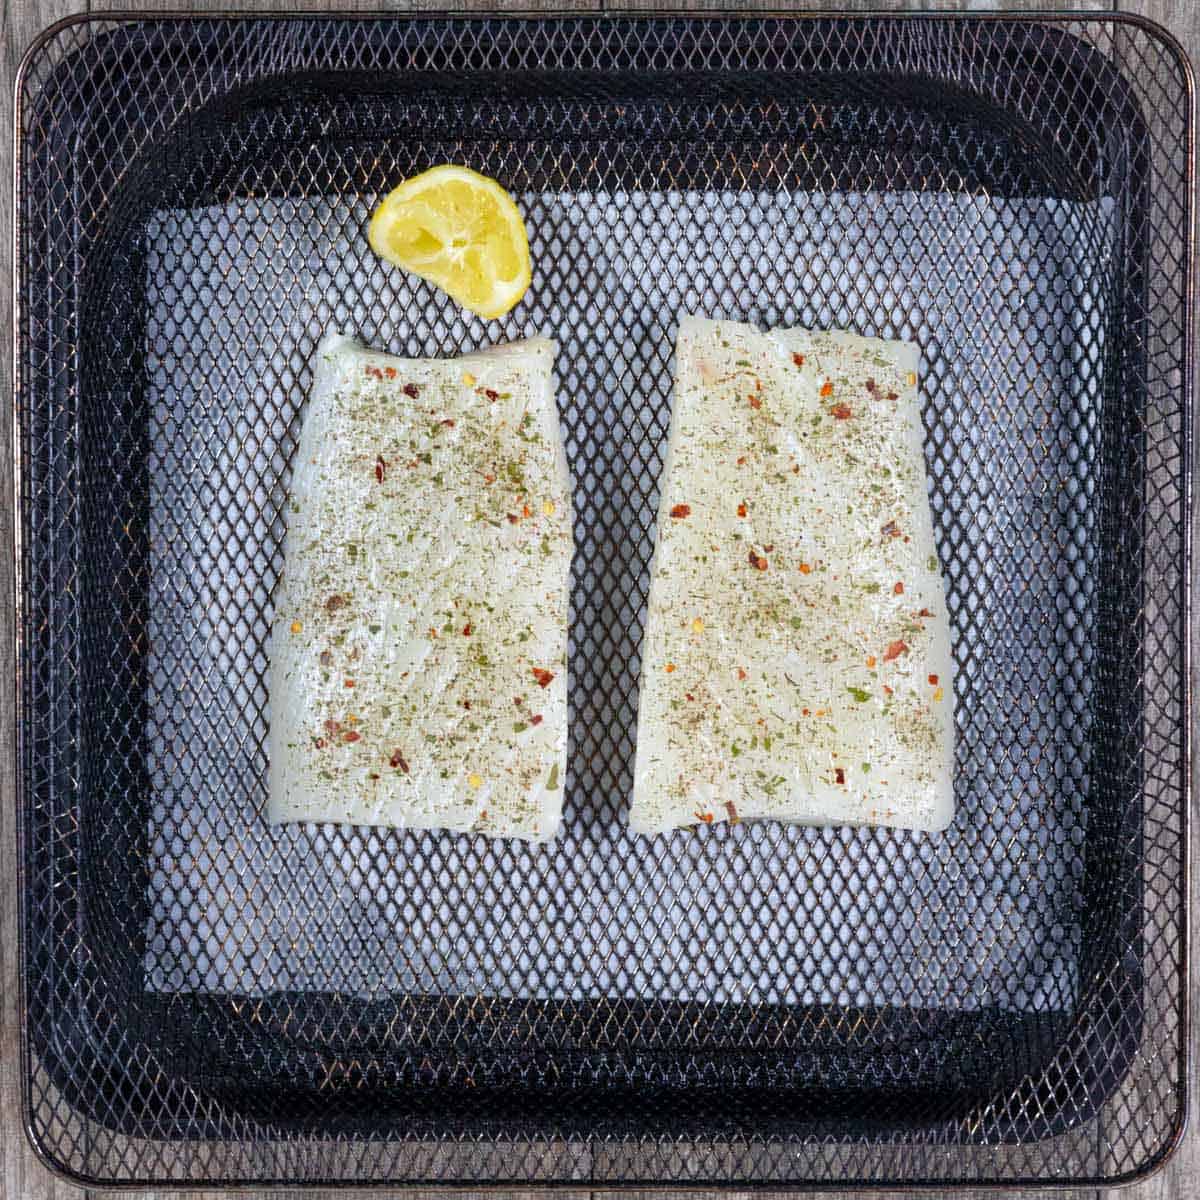 Two fish filets seasoned and on an air fryer basket ready to cook.